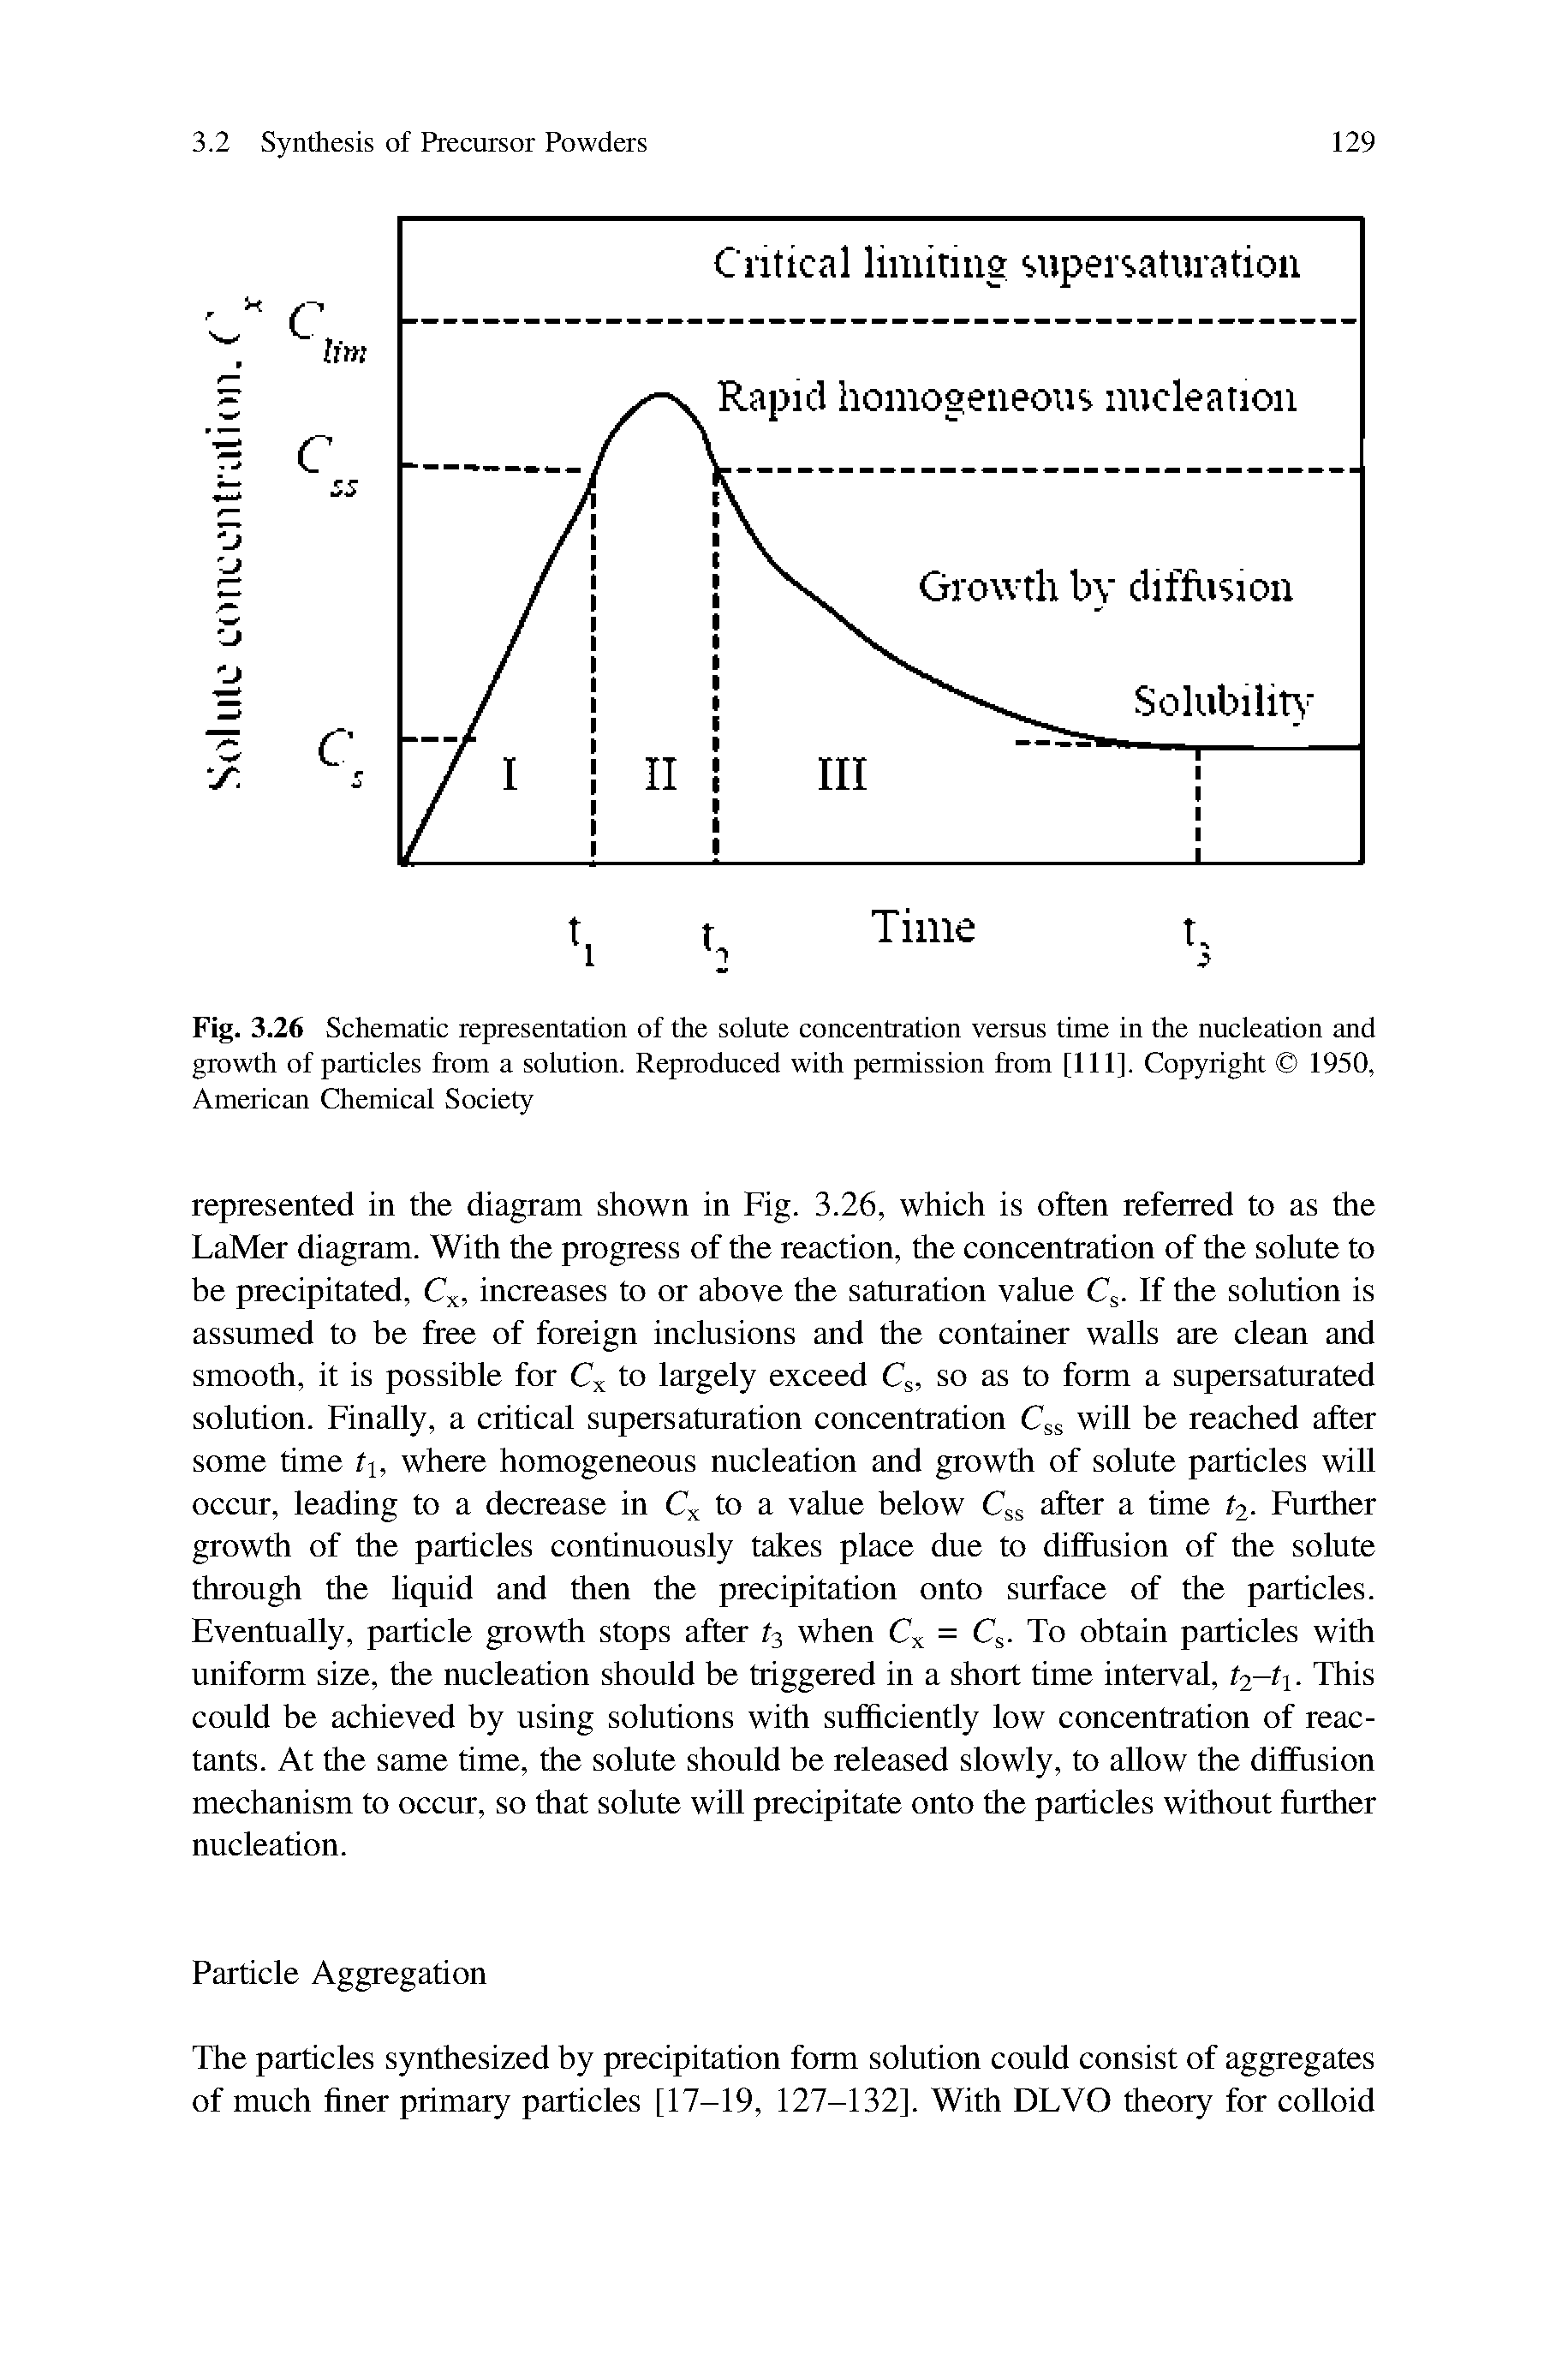 Fig. 3.26 Schematic representation of the solute concentration versus time in the nucleation and growth of particles from a solution. Reproduced with permission from [111]. Copyright 1950, American Chemical Society...